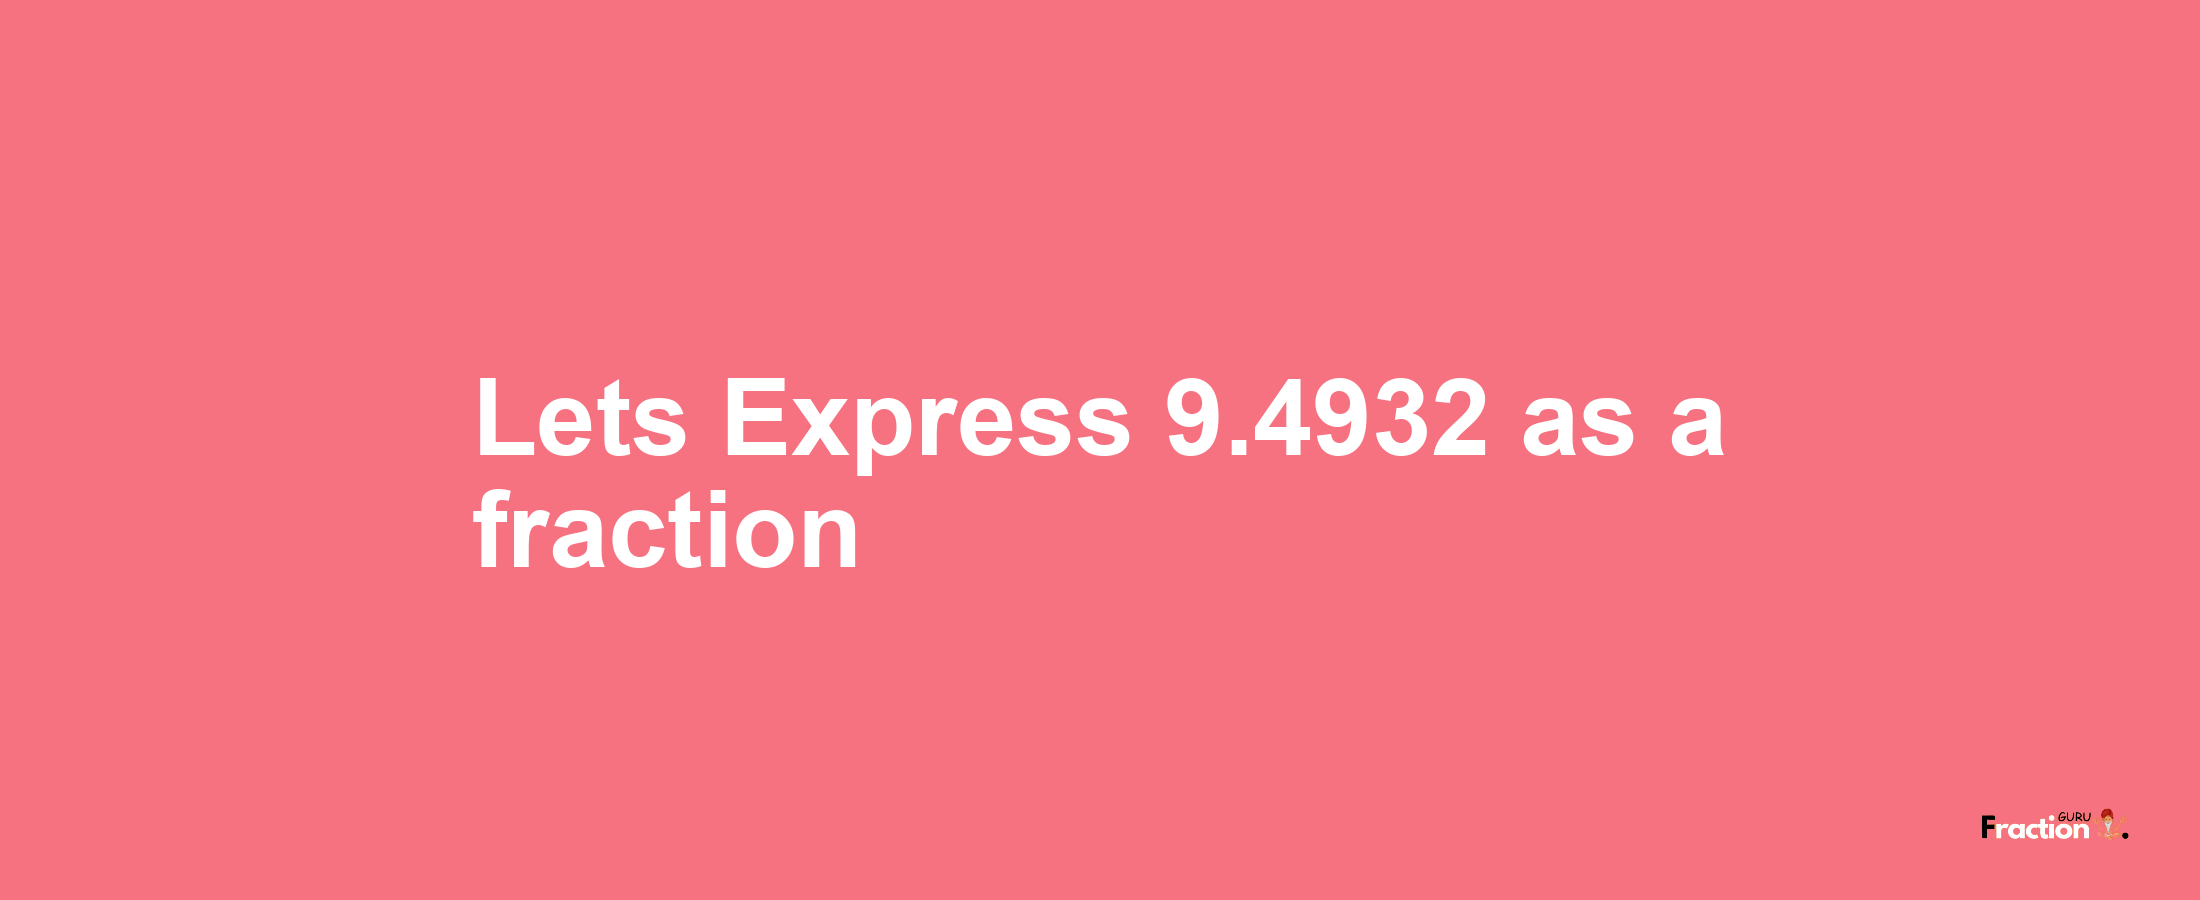 Lets Express 9.4932 as afraction